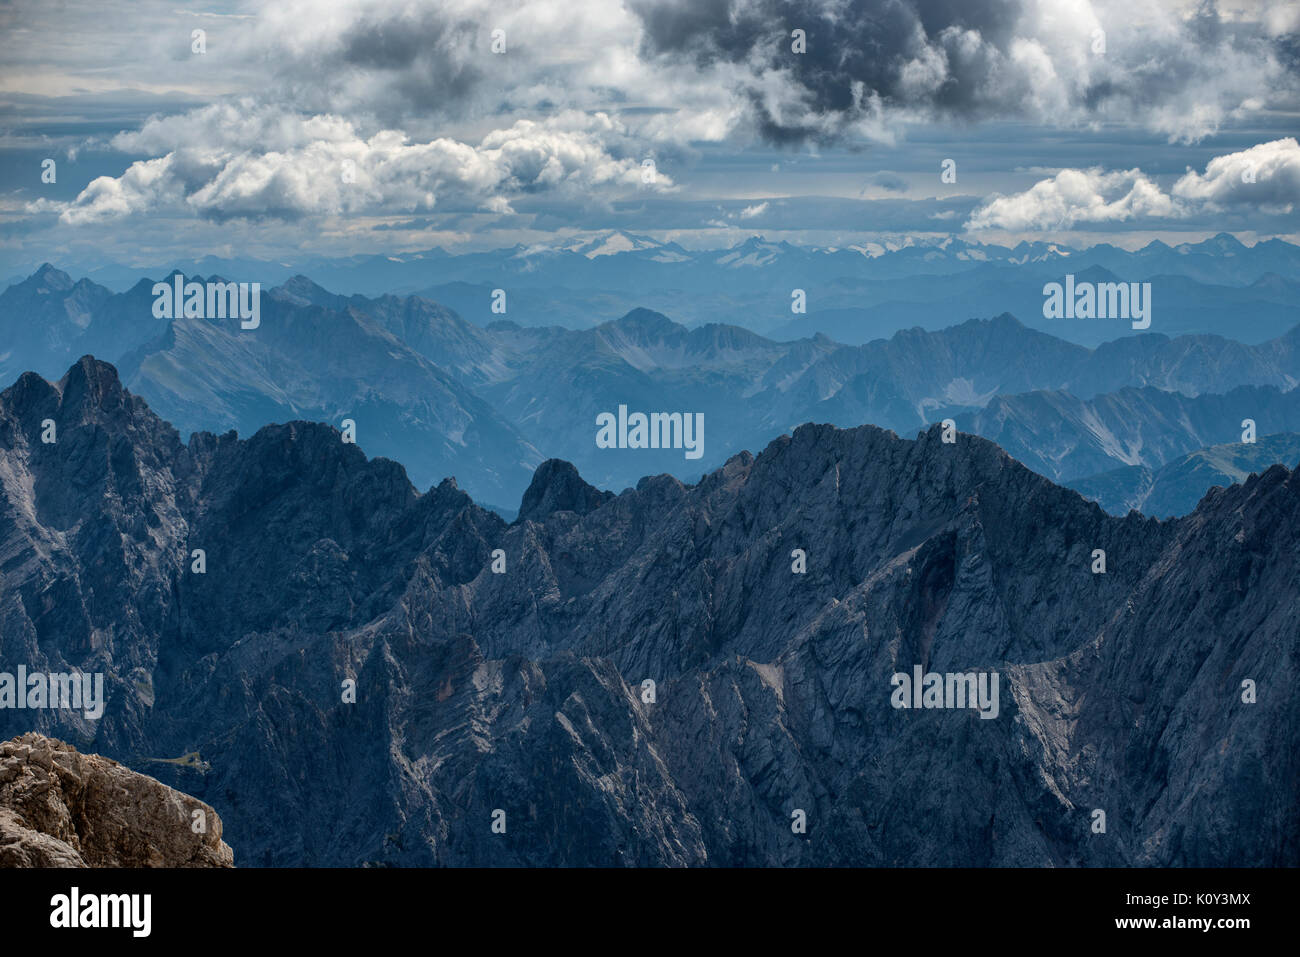 The view from the top of the Zugspitze mountain on the Austria Germany border. Stock Photo